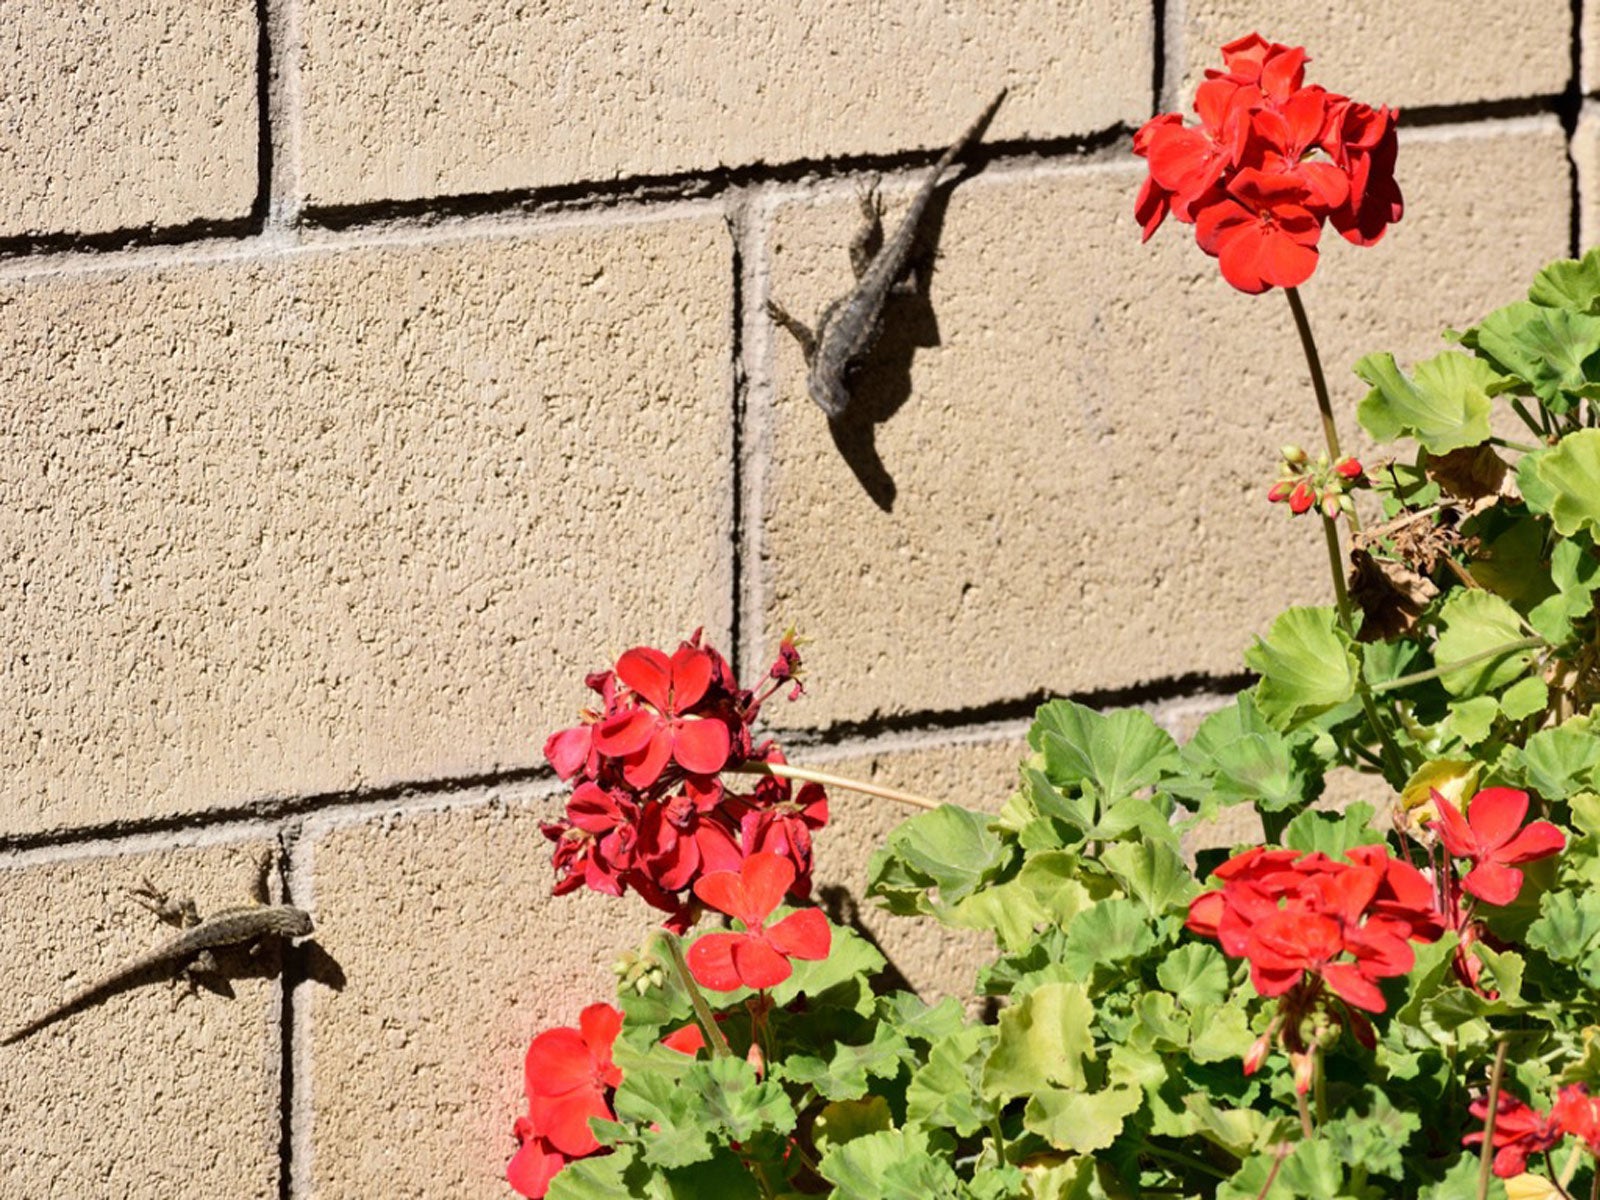 Lizard Control In Gardens How To Get Rid Of Lizards In The Landscape